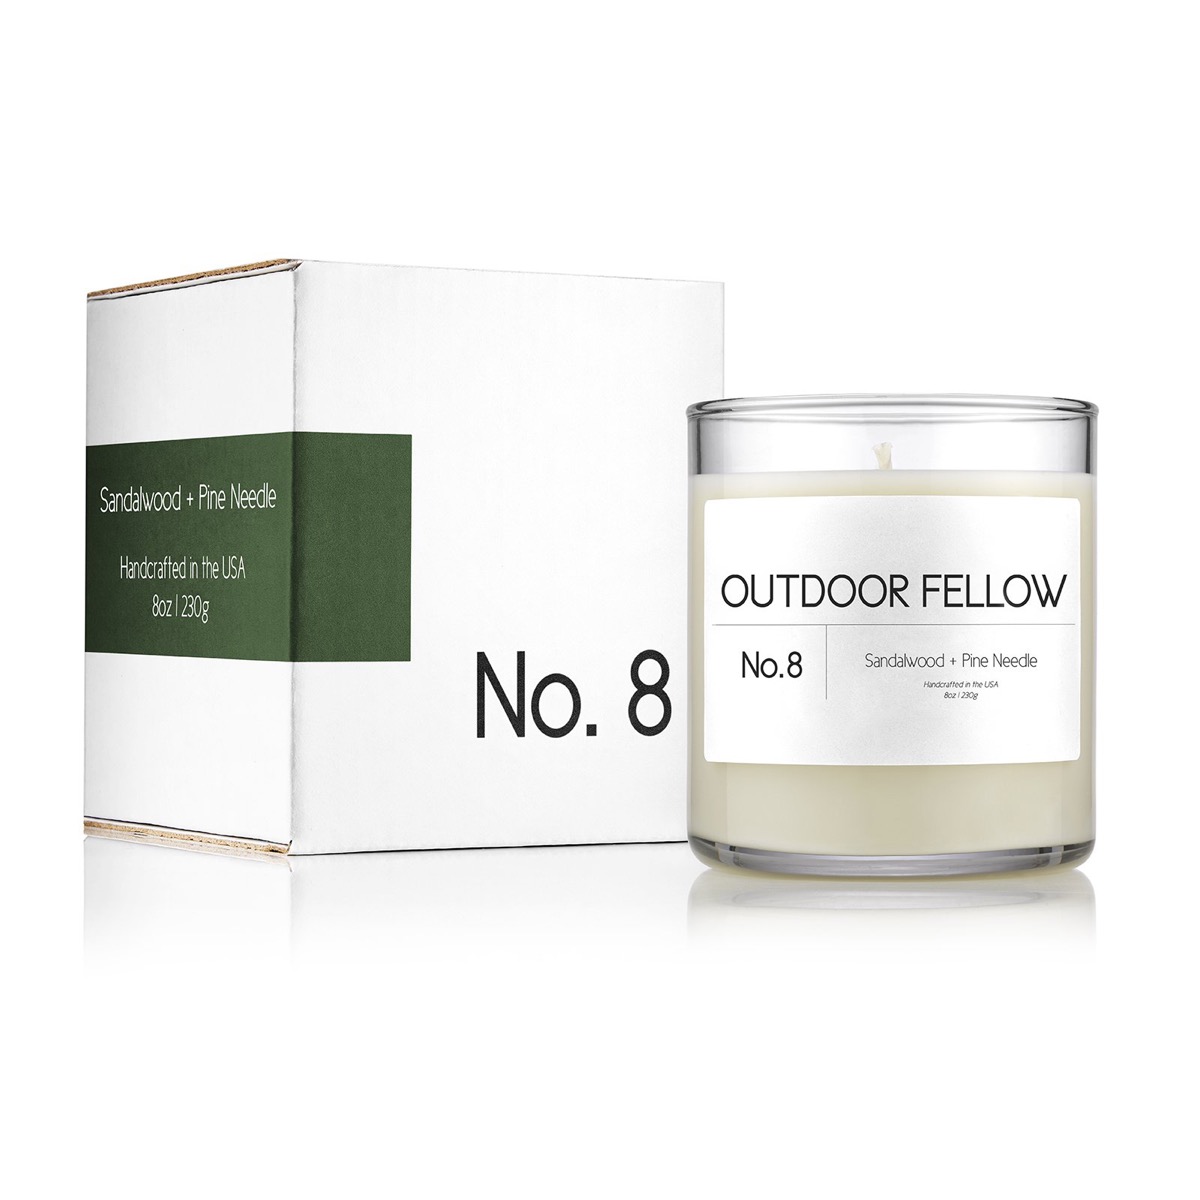 A sandalwood and pine needle scented candle